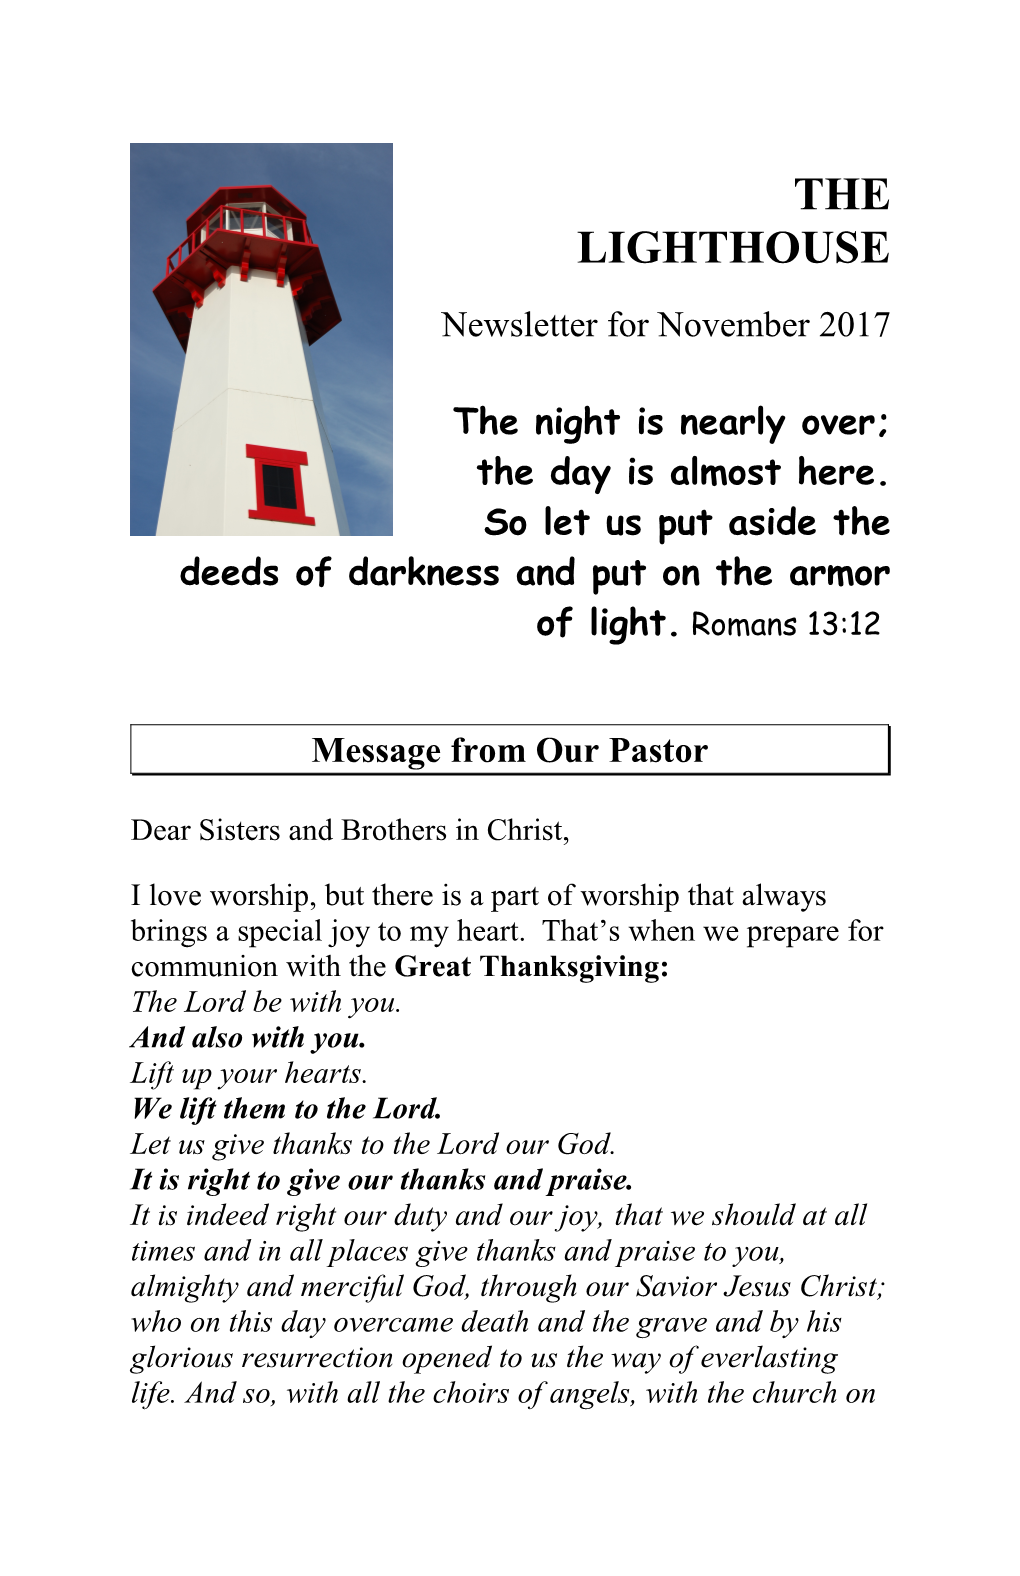 Message from Our Pastor